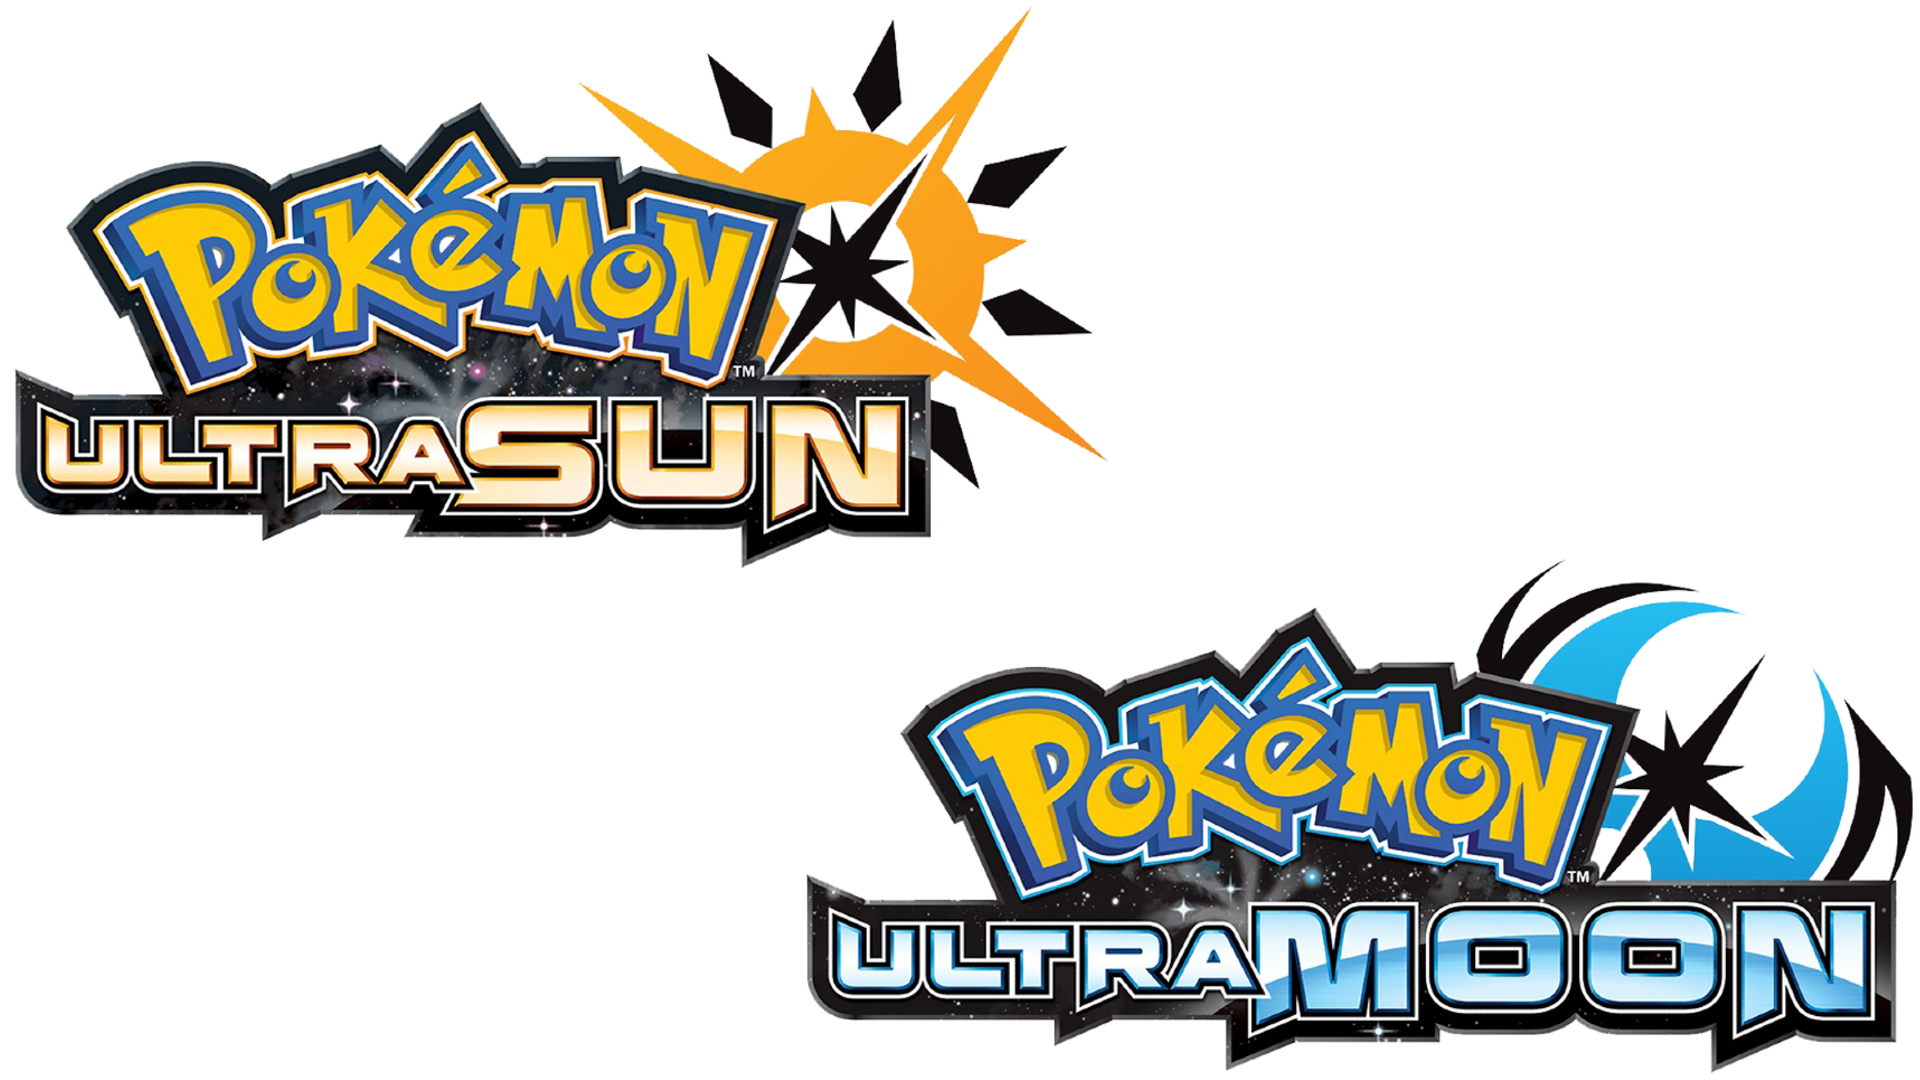 Pokemon Ultra Sun and Moon (2017) MP3 - Download Pokemon Ultra Sun and Moon  (2017) Soundtracks for FREE!